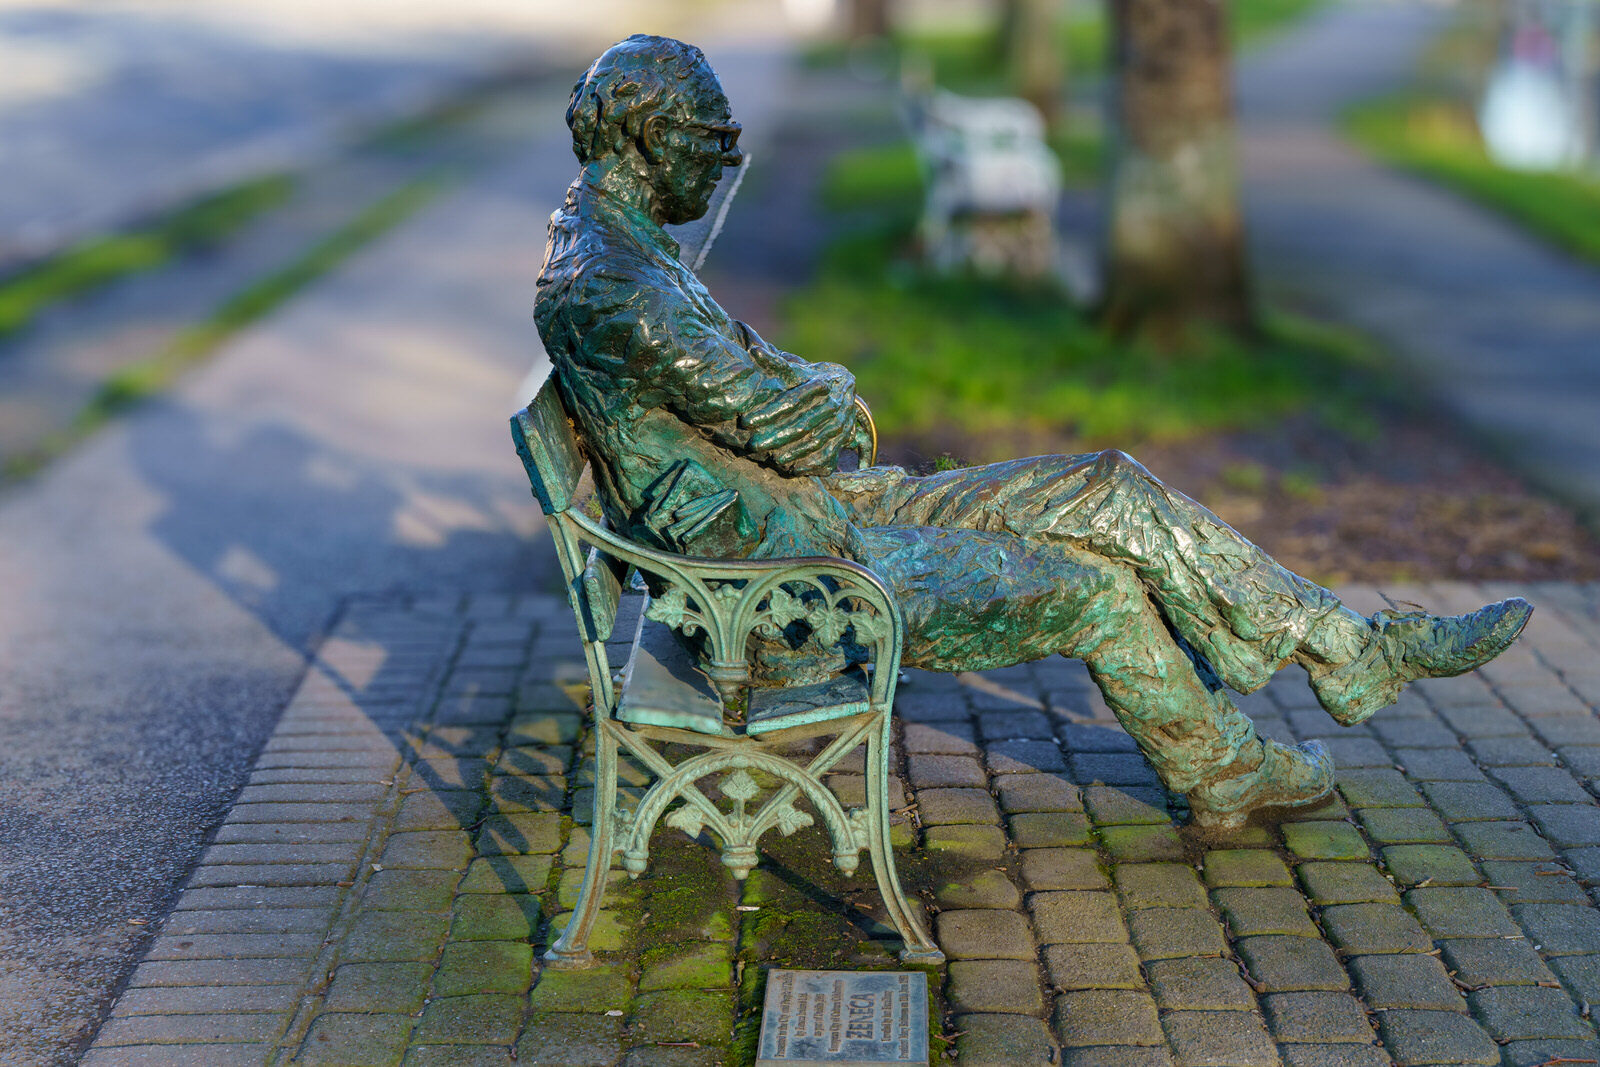 PATRICK KAVANAGH SCULPTURE [PRESENTED TO CITY AND PEOPLE OF DUBLIN BY ZENEZA]-228031-1